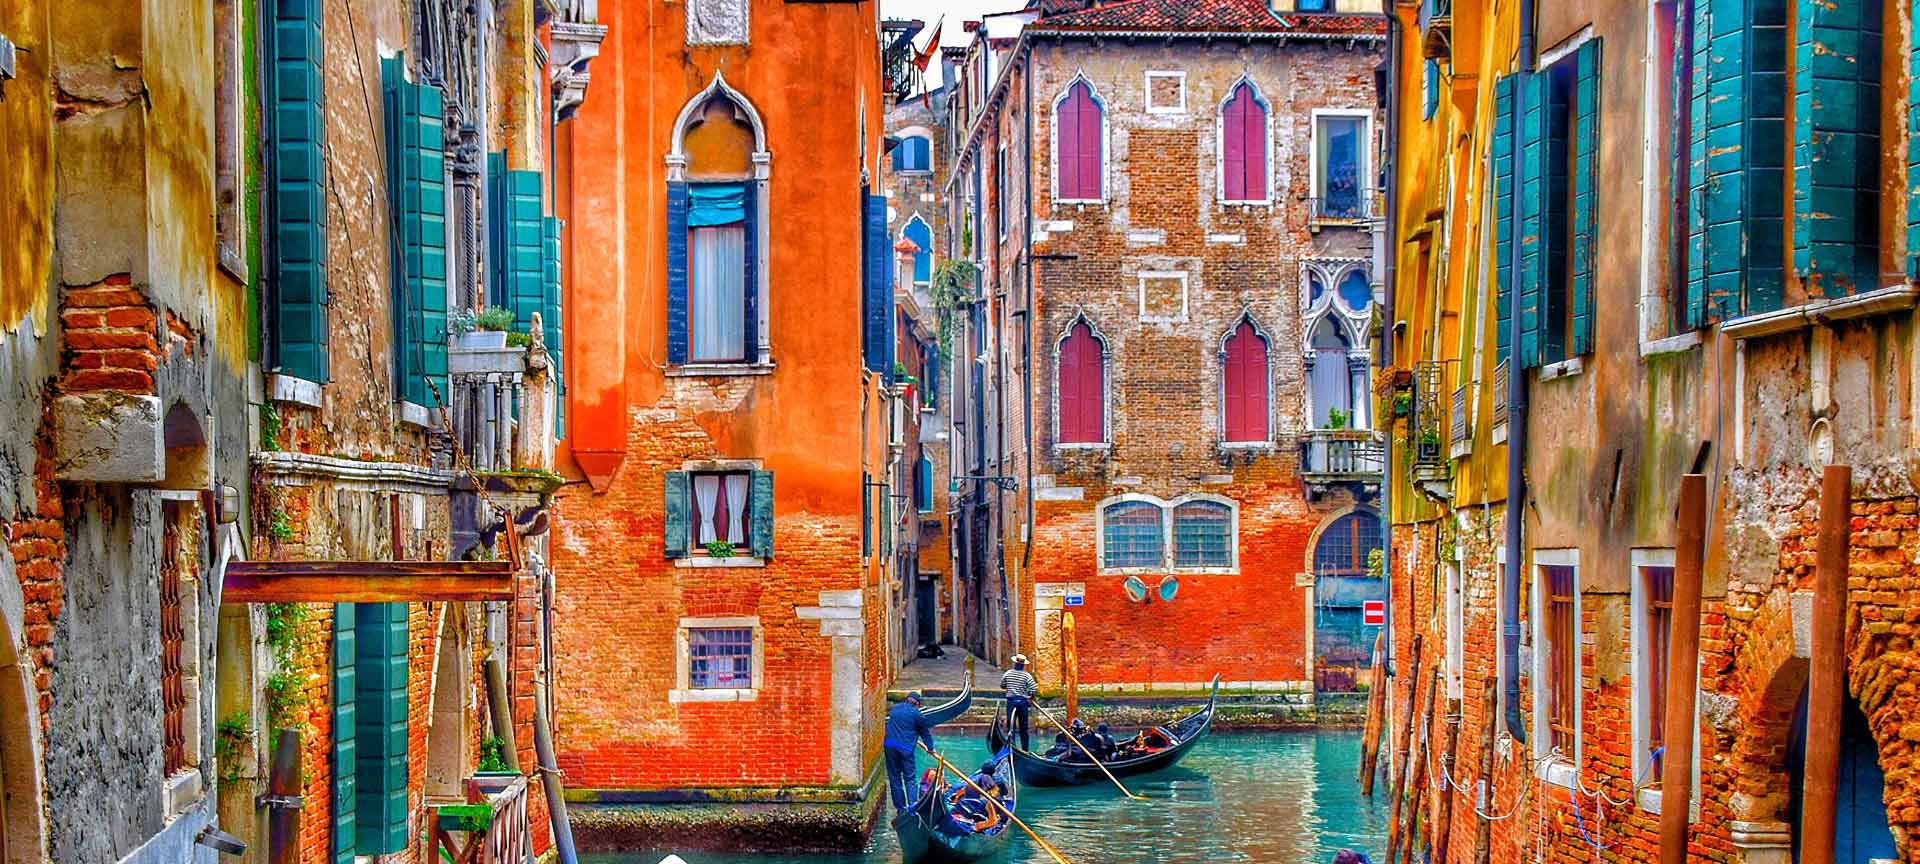 Painted building in Venice Italy